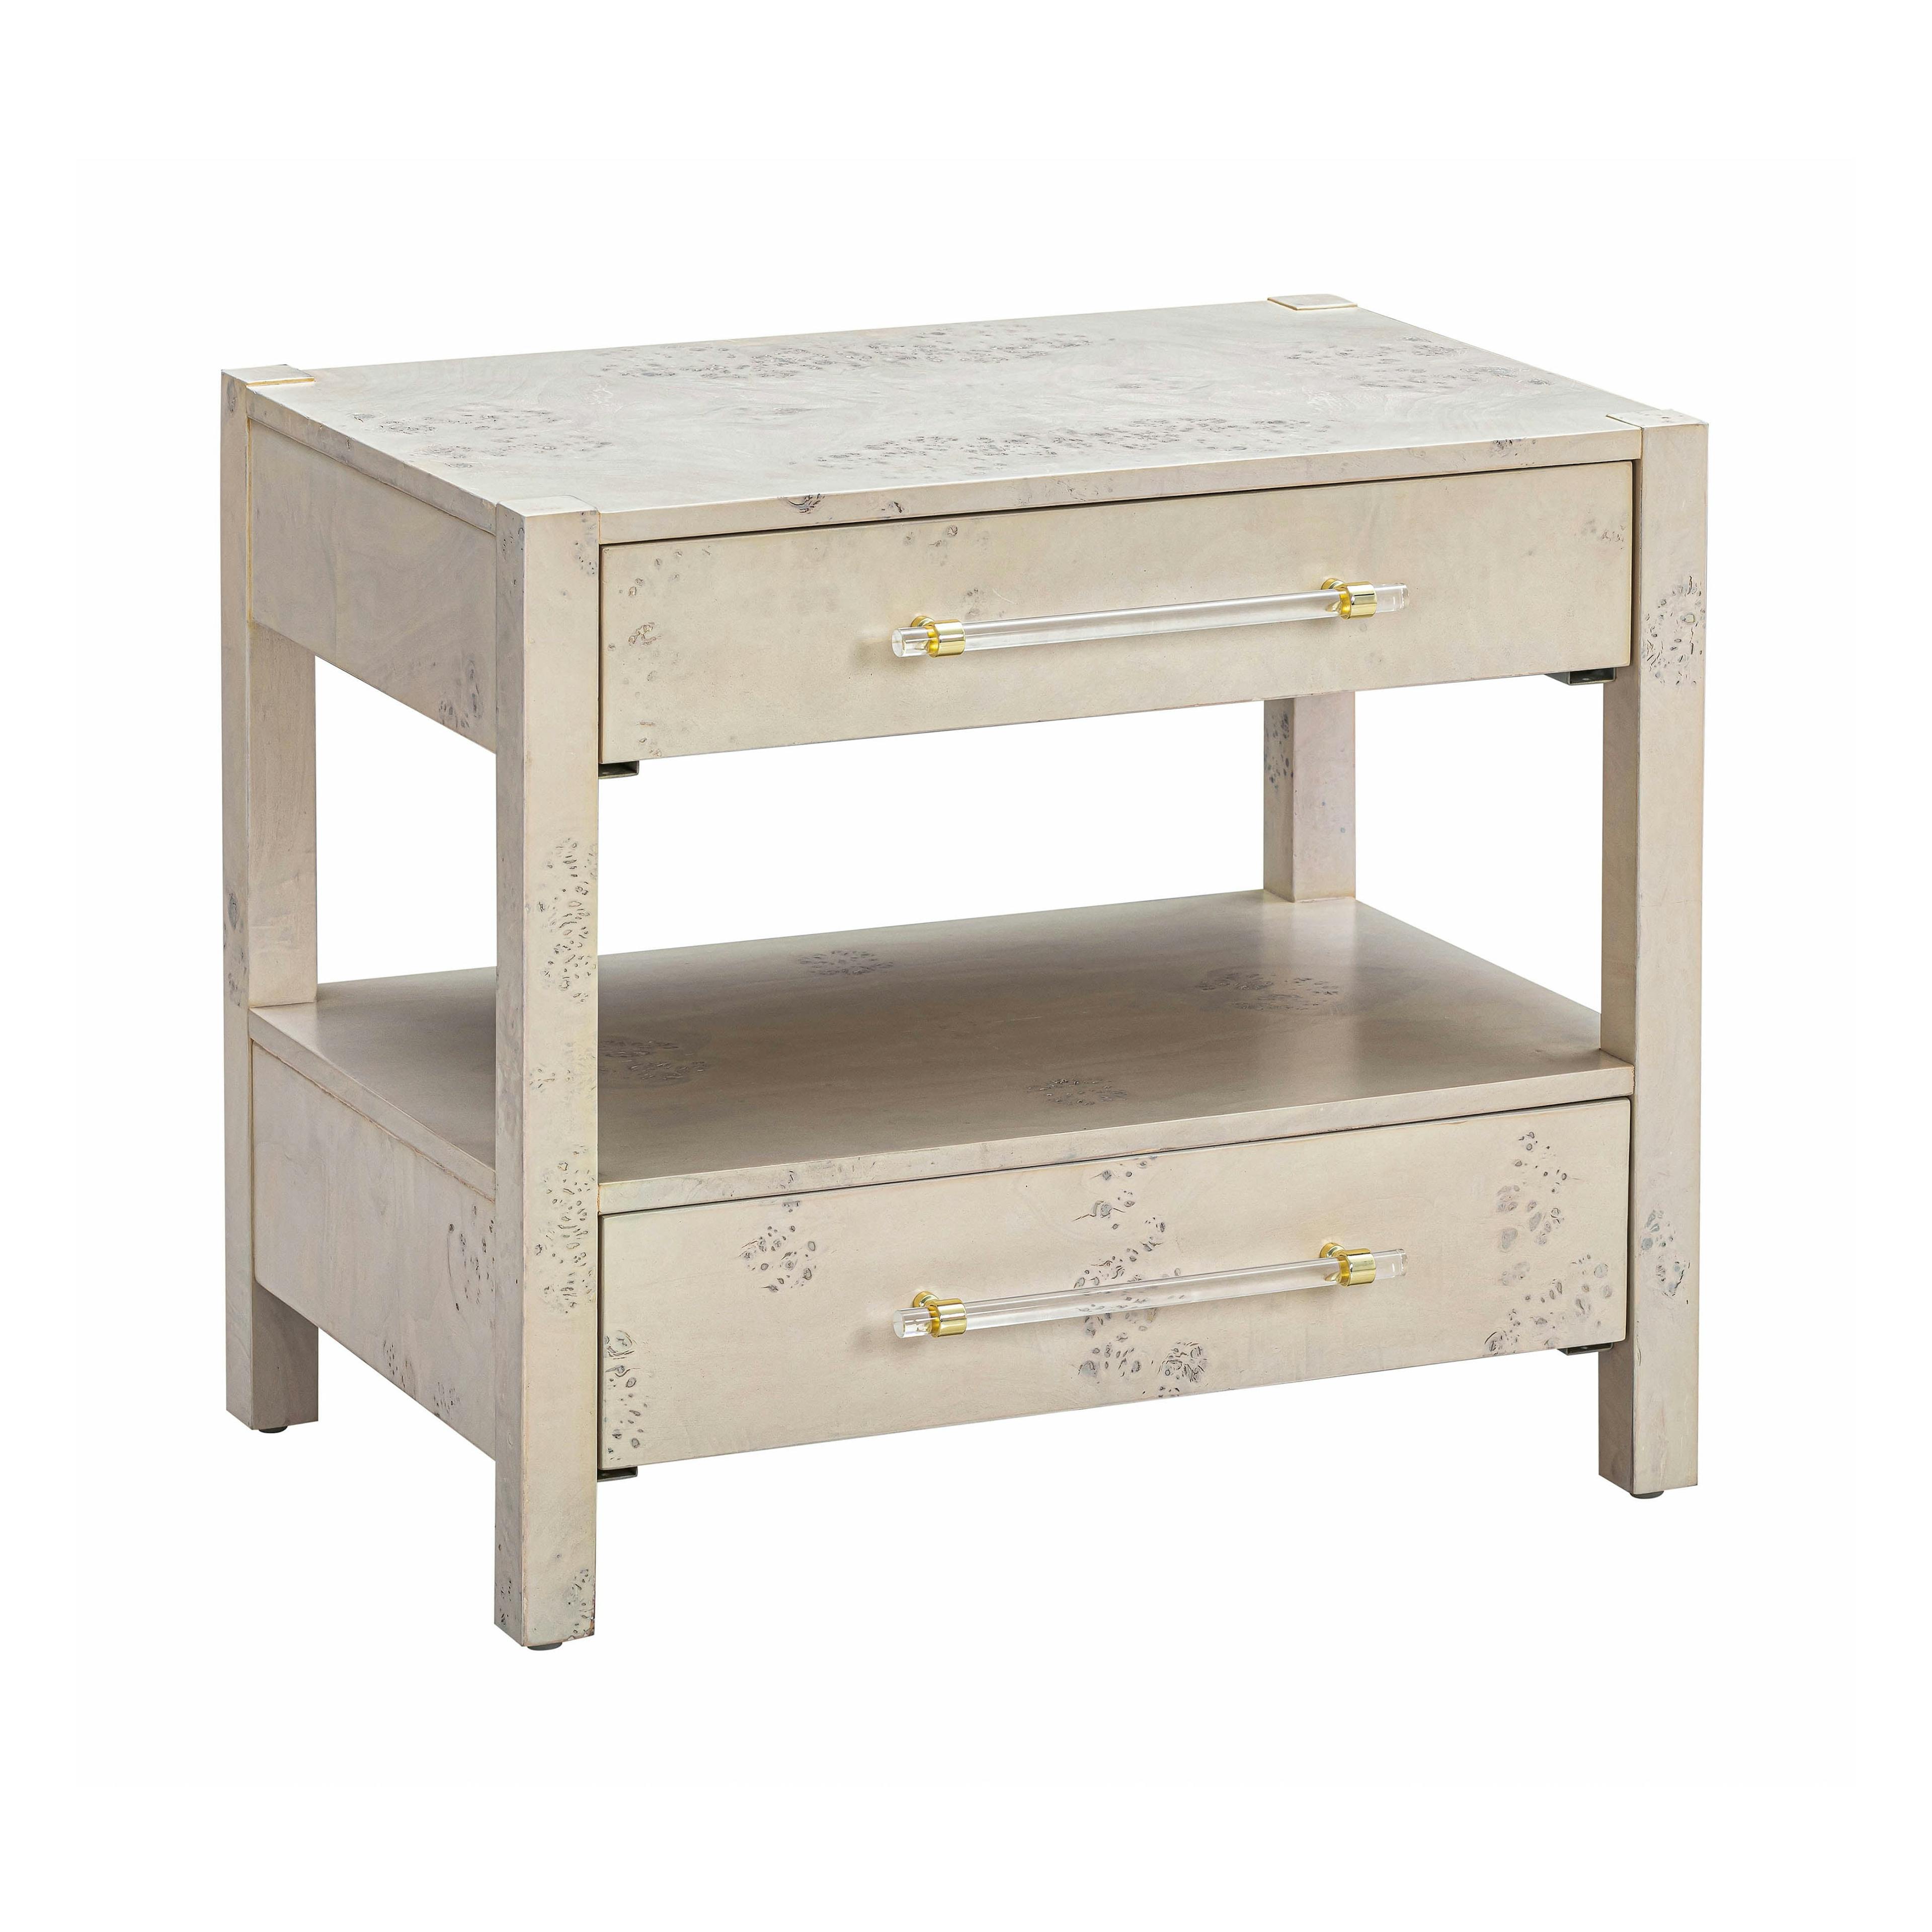 Contemporary White Burl Acacia Nightstand with Brass Accents